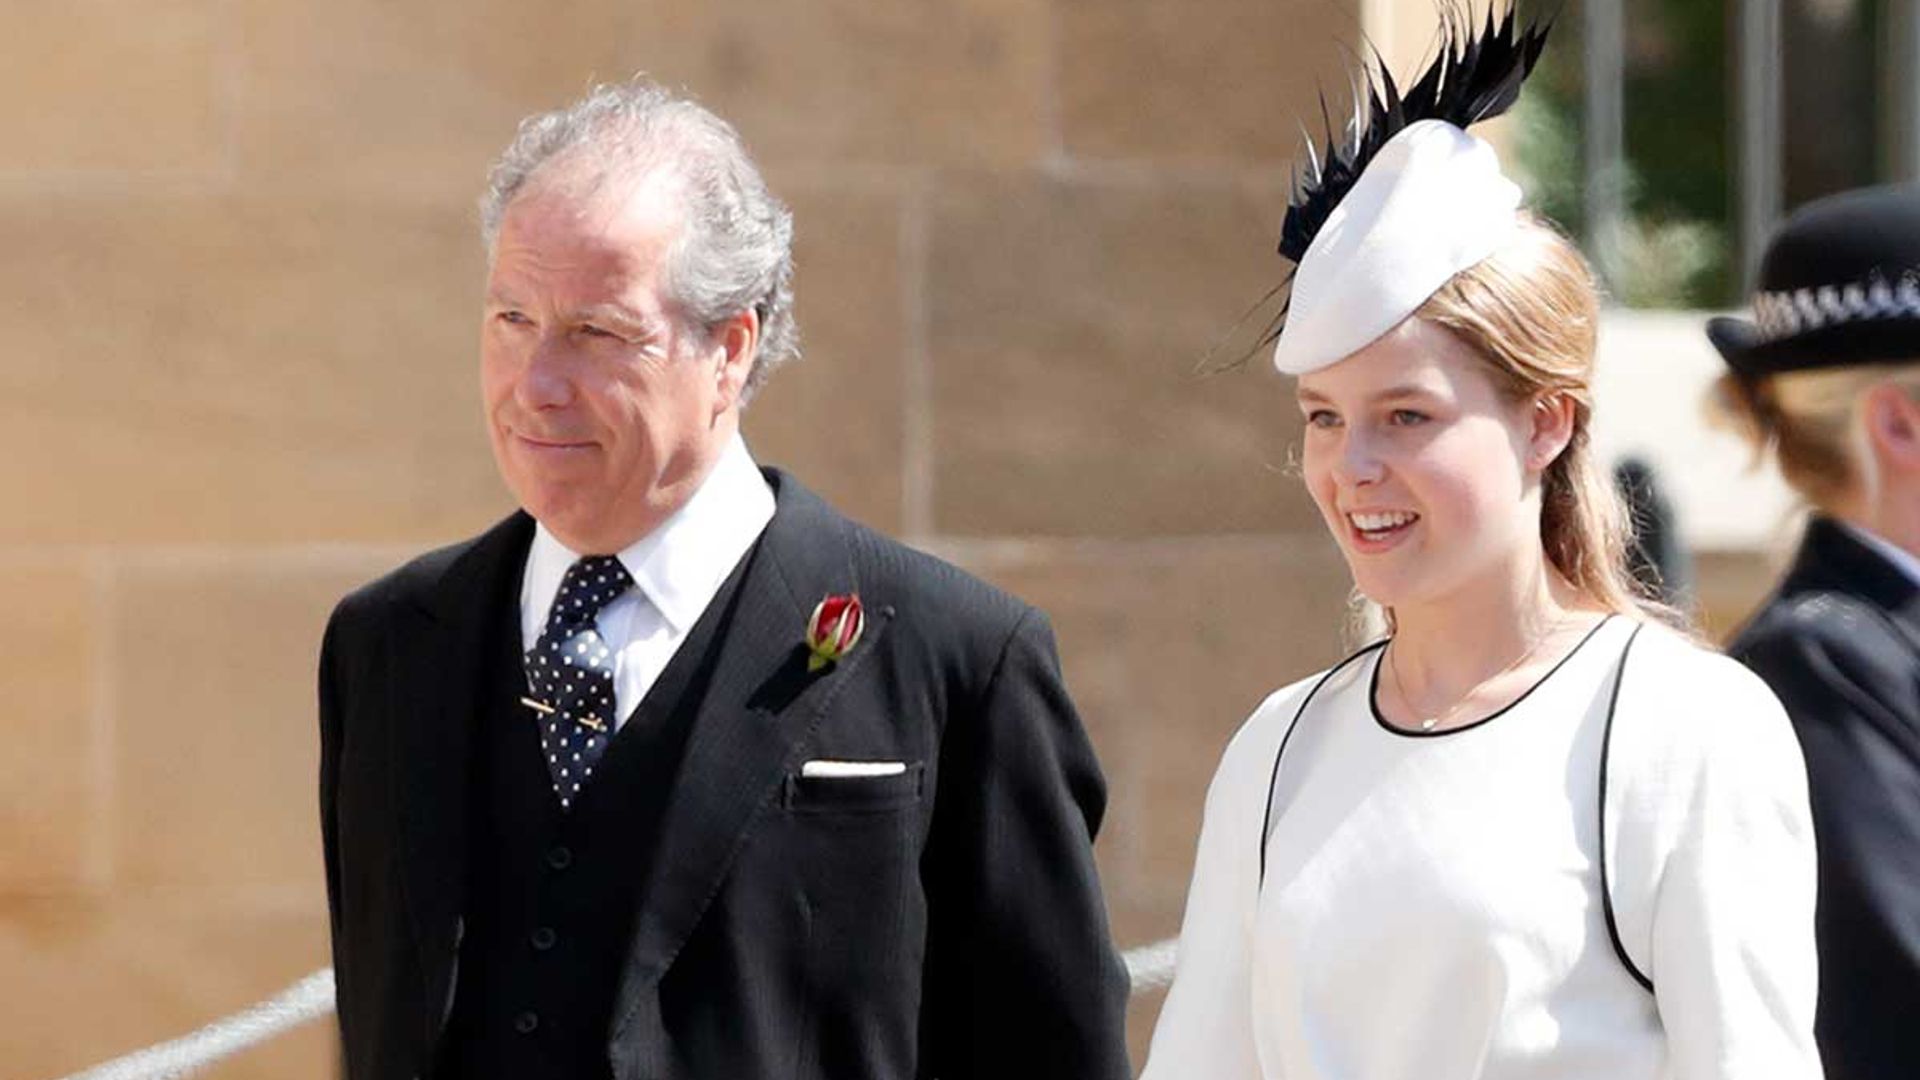 Princess Margaret's granddaughter Lady Margarita celebrates 19th birthday - all you need to know